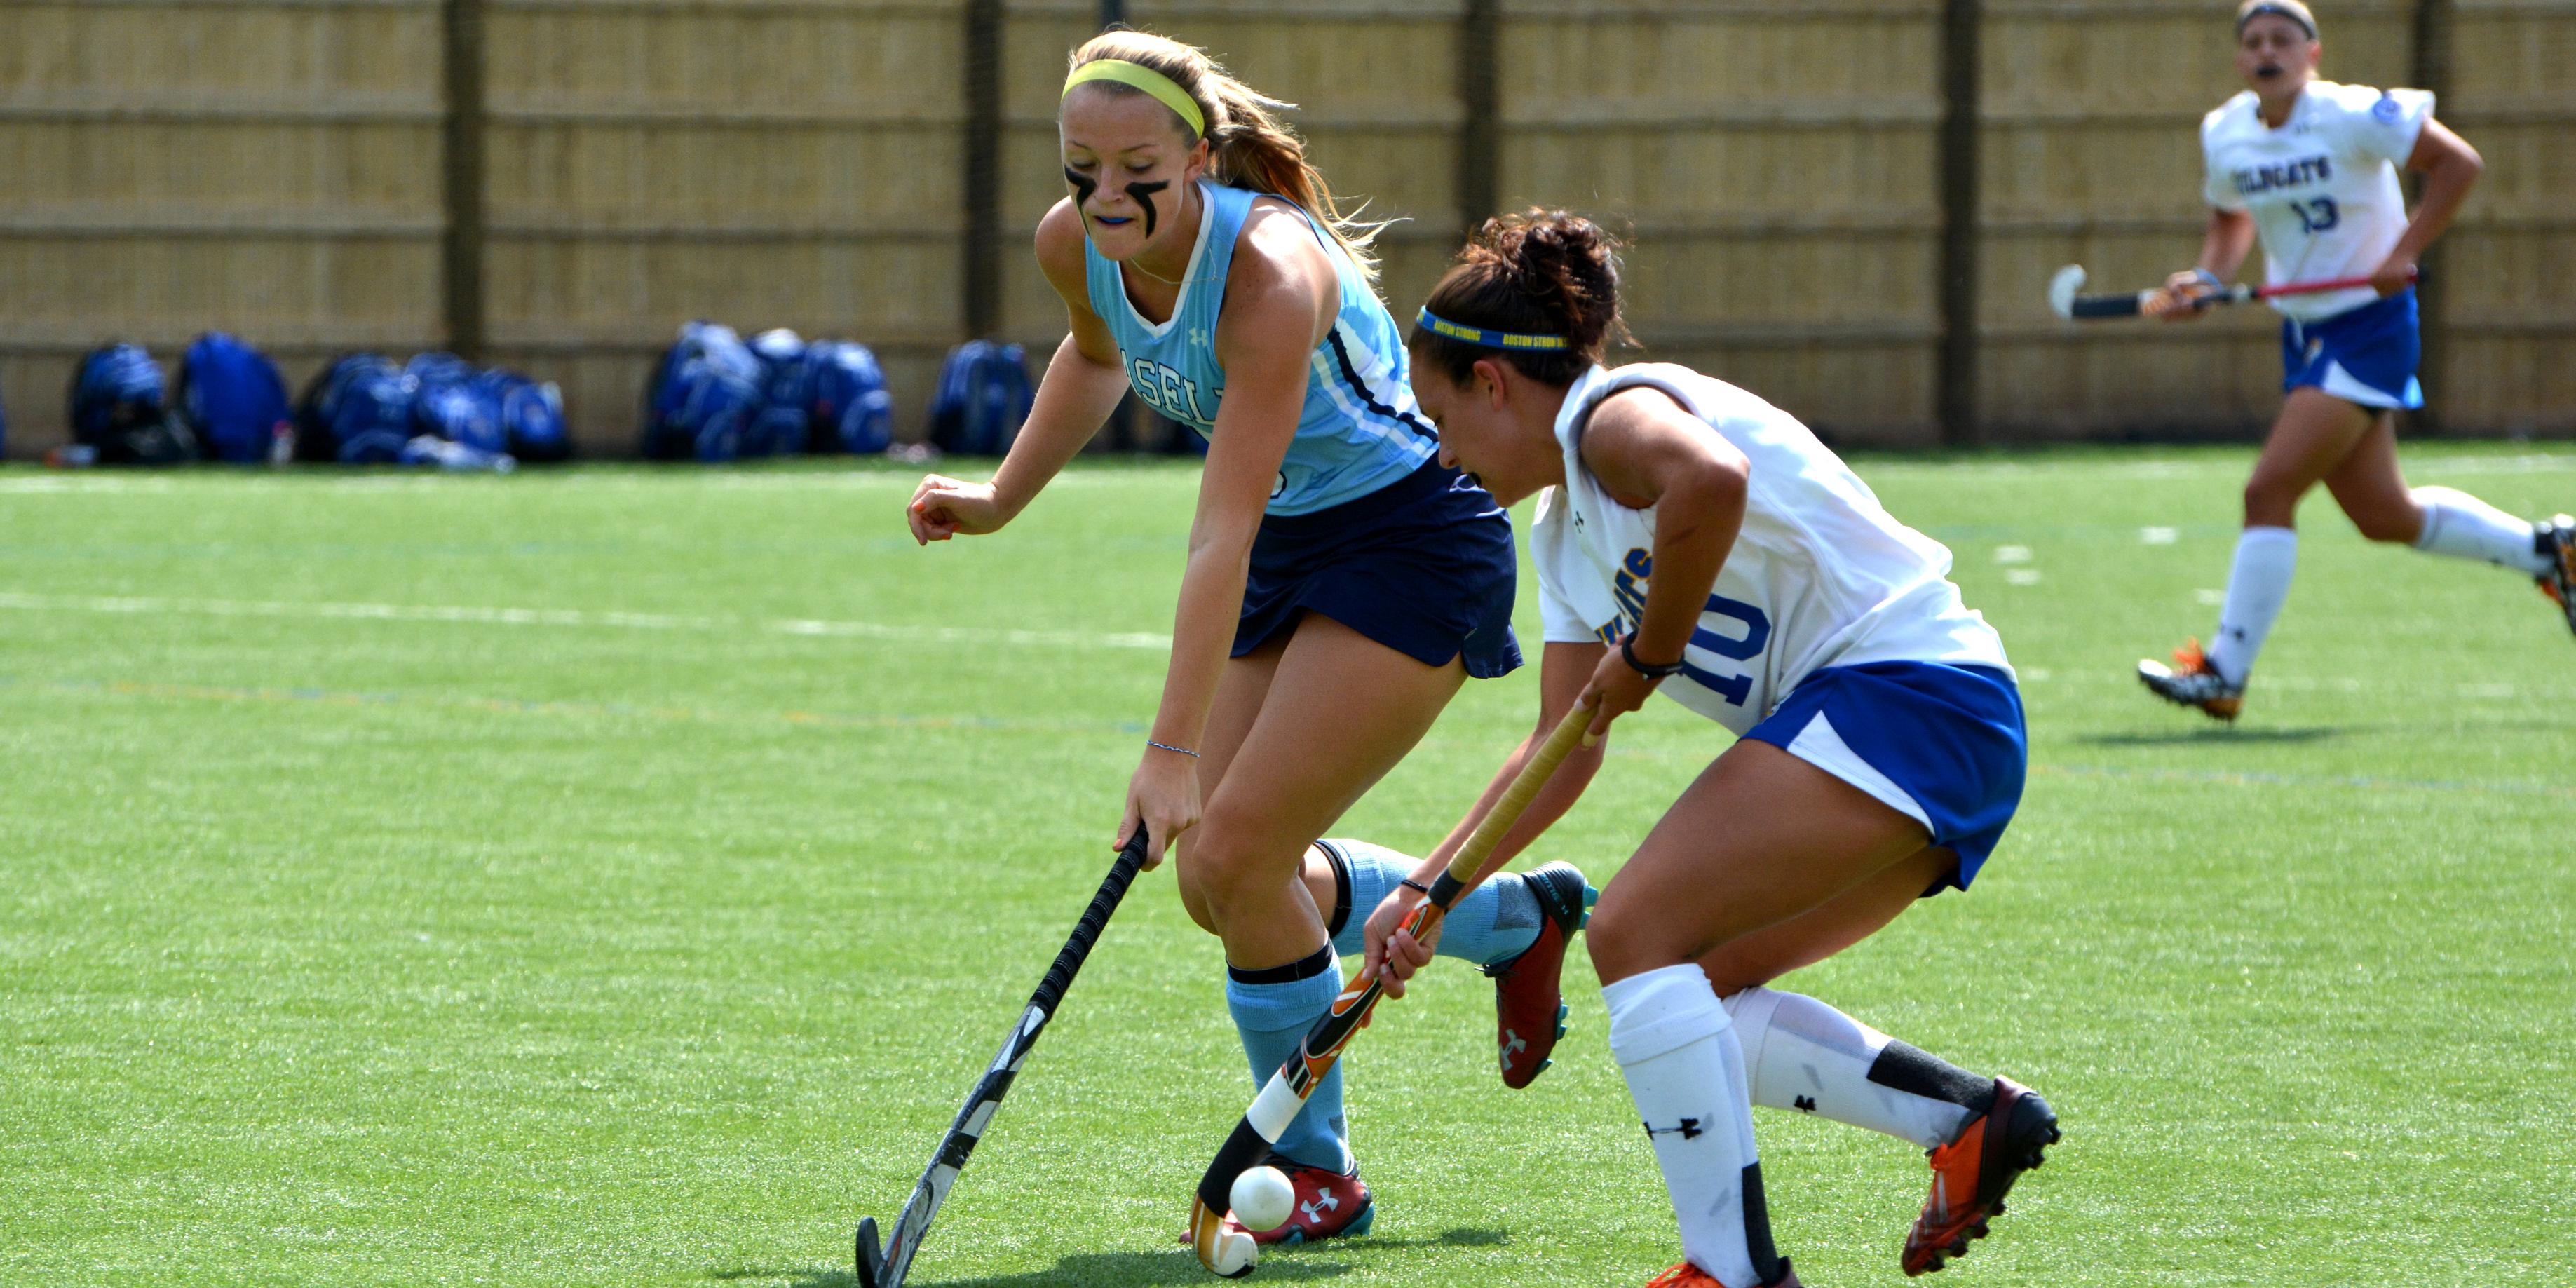 Gleason Goal Helps Lasell to 1-0 Victory over Rivier in Field Hockey